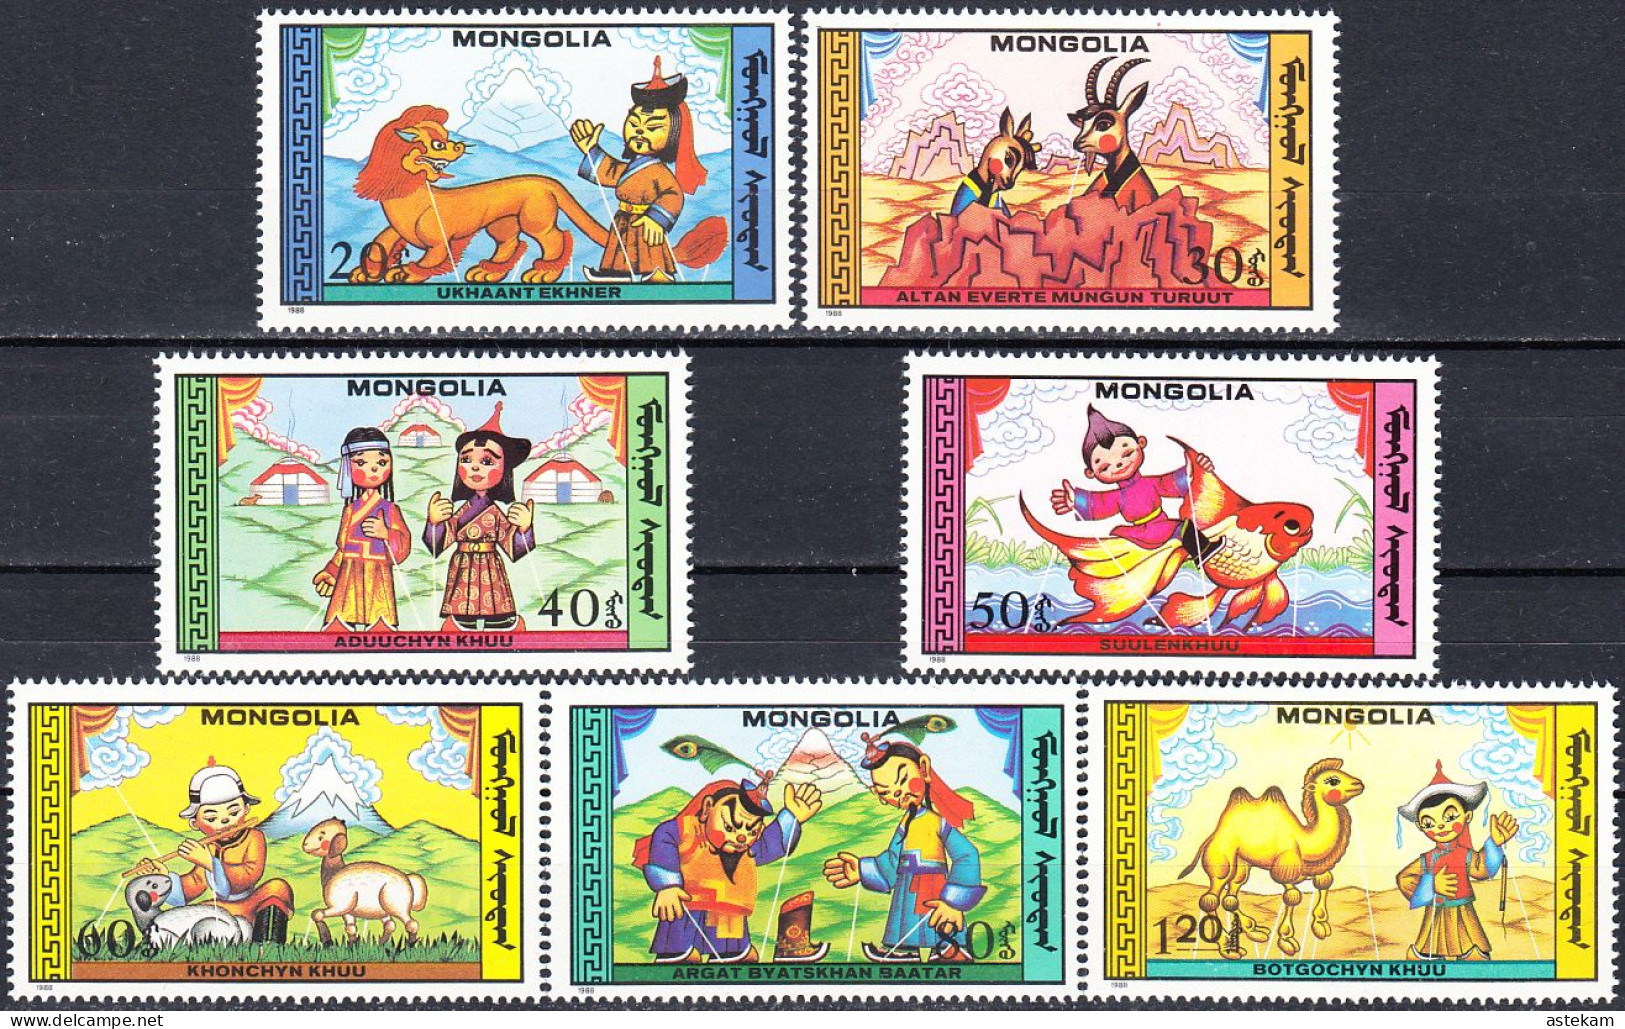 MONGOLIA 1988, PUPPET THEATER, COMPLETE MNH SERIES With GOOD QUALITY, *** - Mongolie